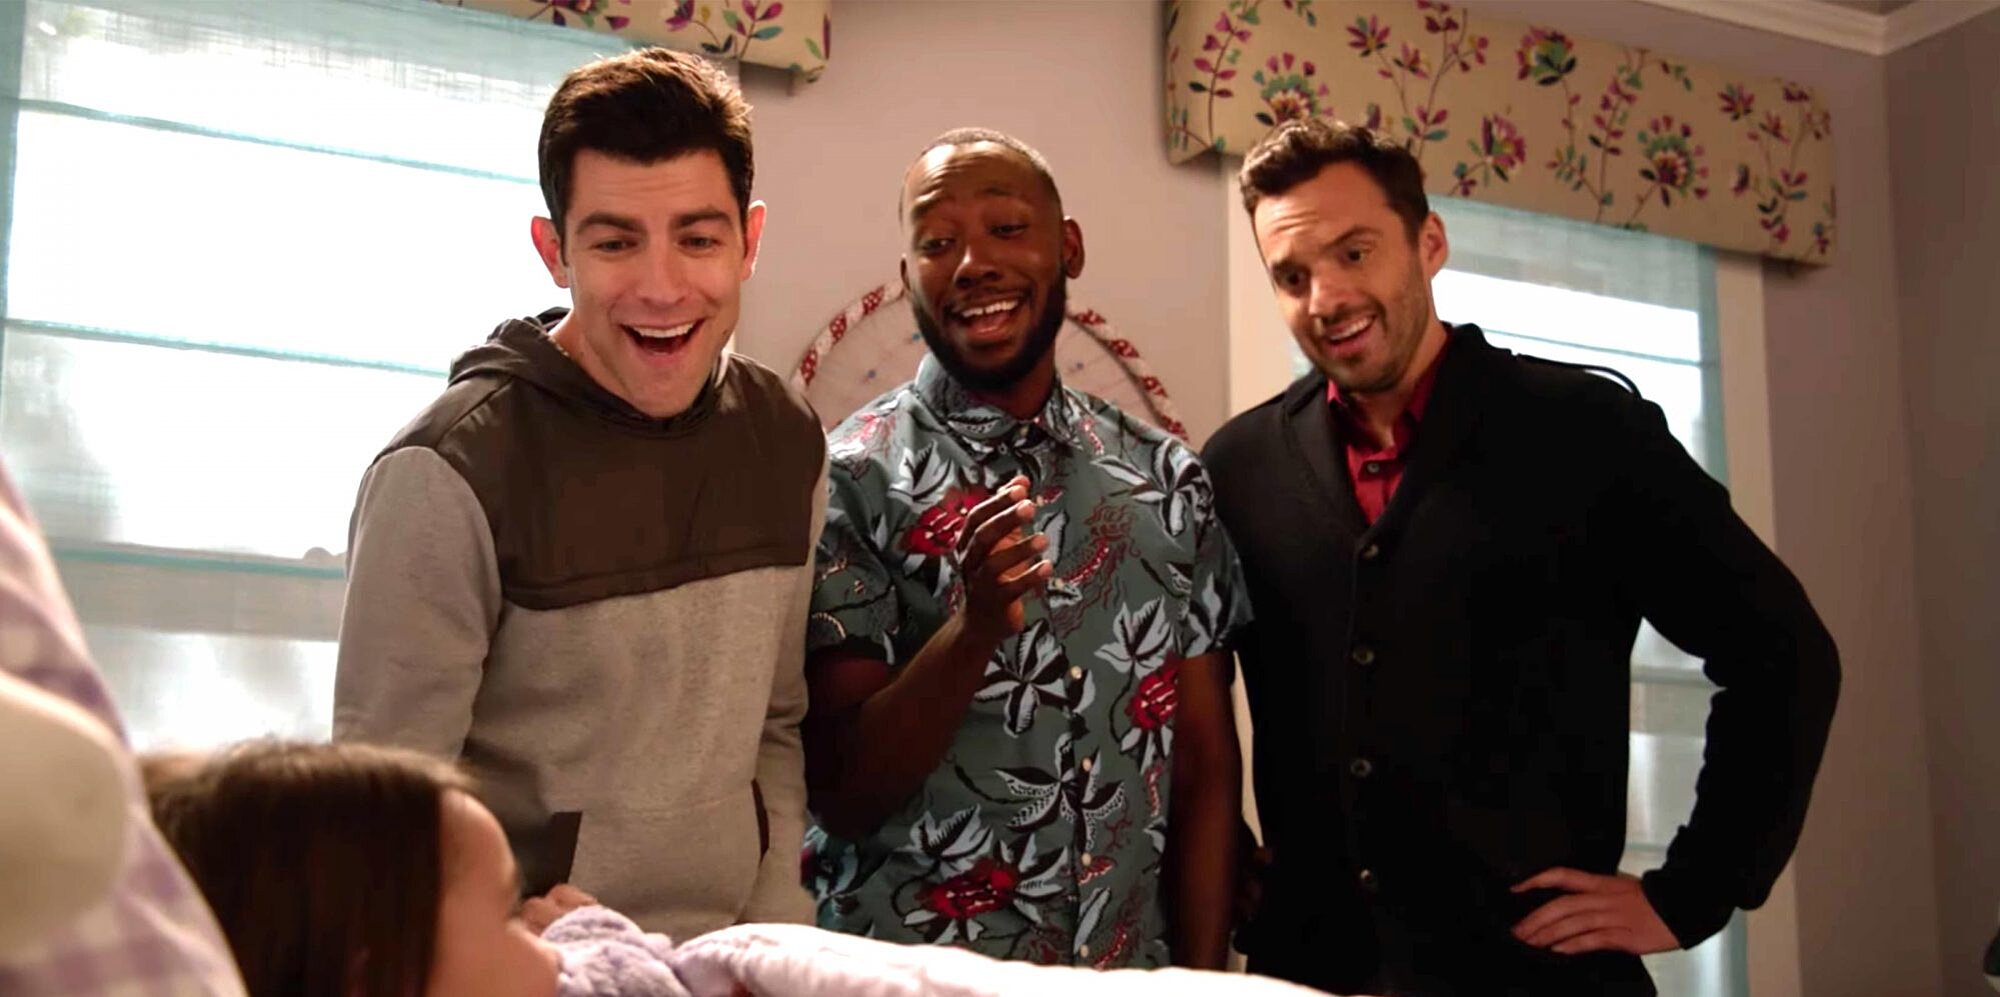 Winston Schmidt, Winston Bishop, and Nick Miller having a laugh while putting Schmidt's daughter, Ruth, to sleep in New Girl (2011-2018).